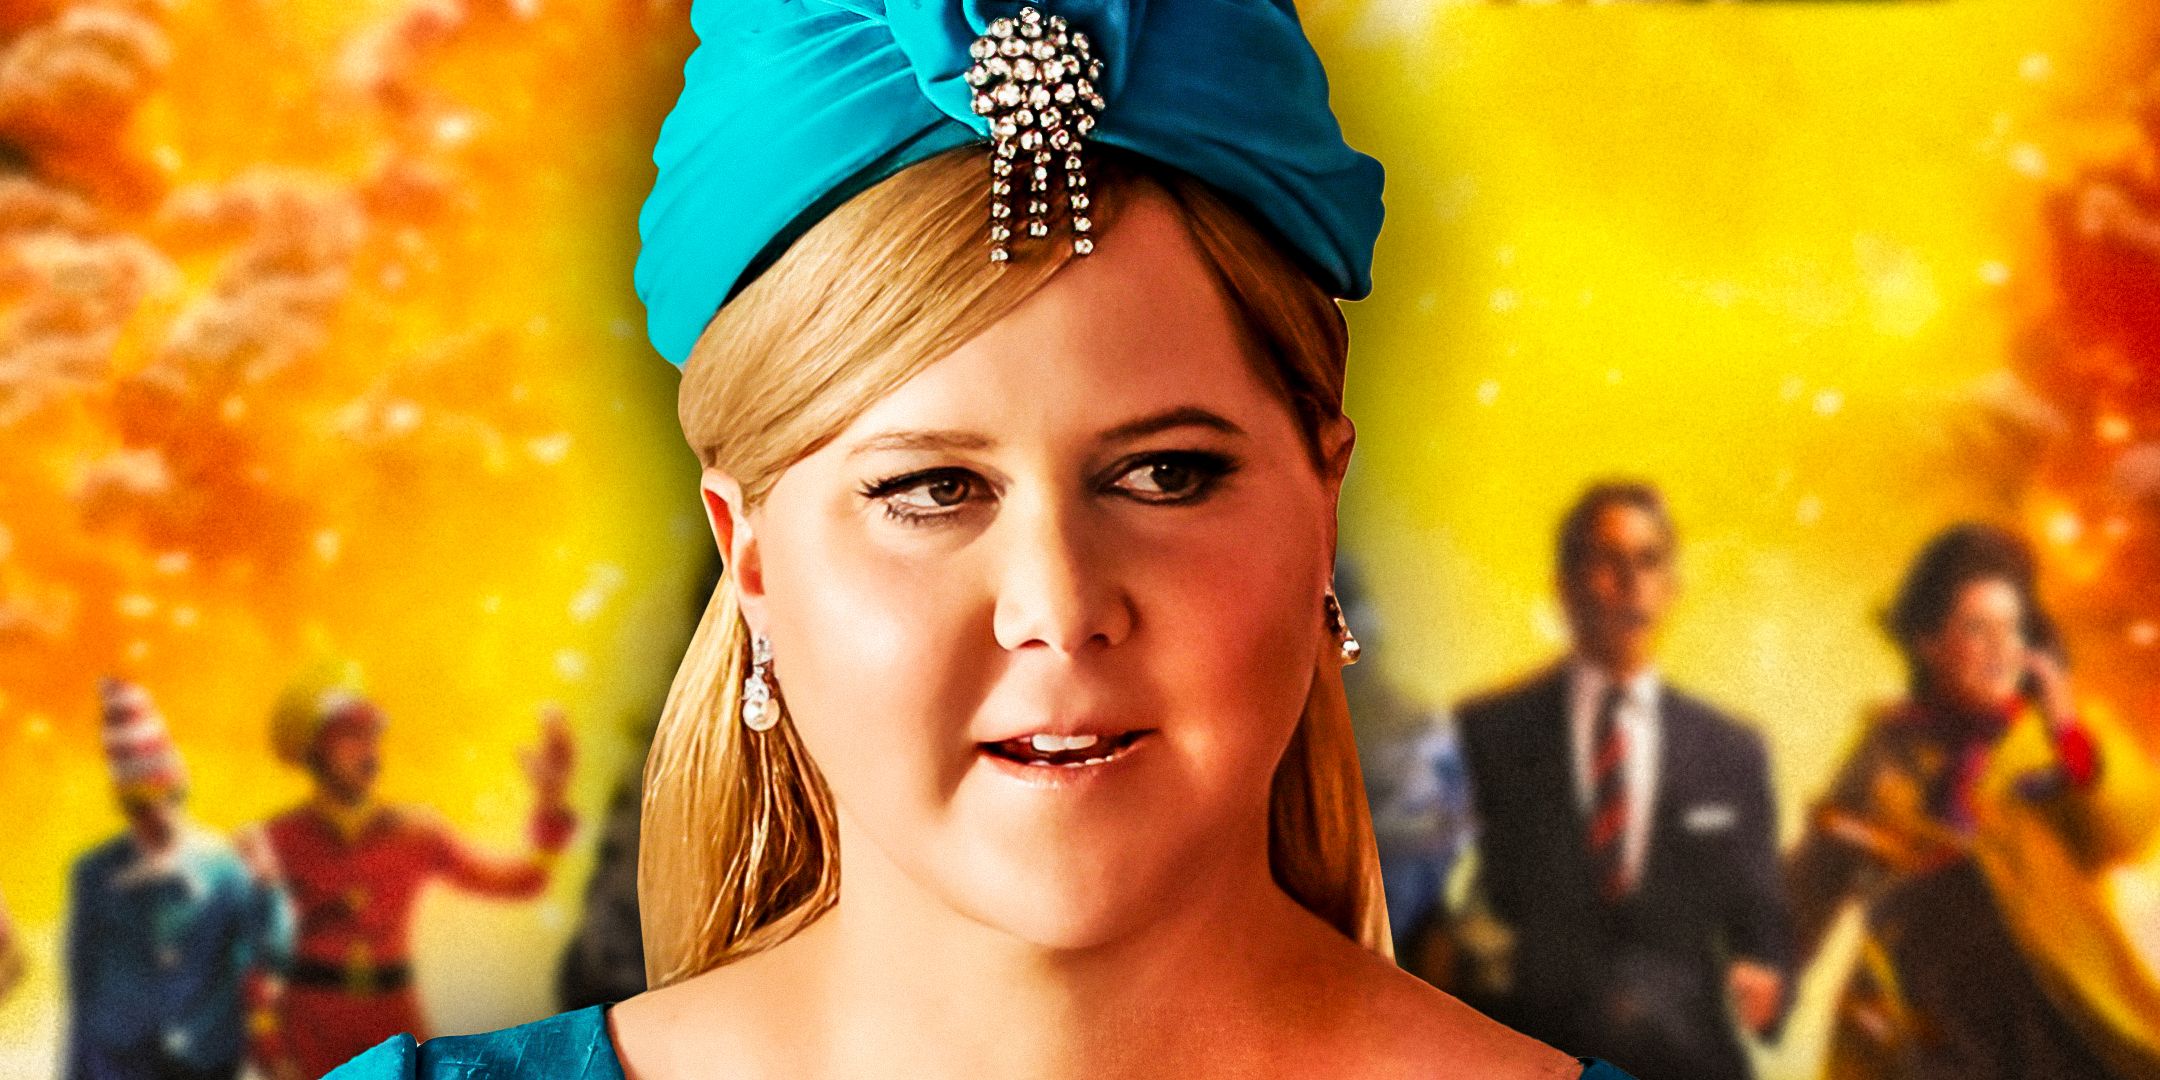 Unfrosted Amy Schumer as Marjorie Post with other characters in the background